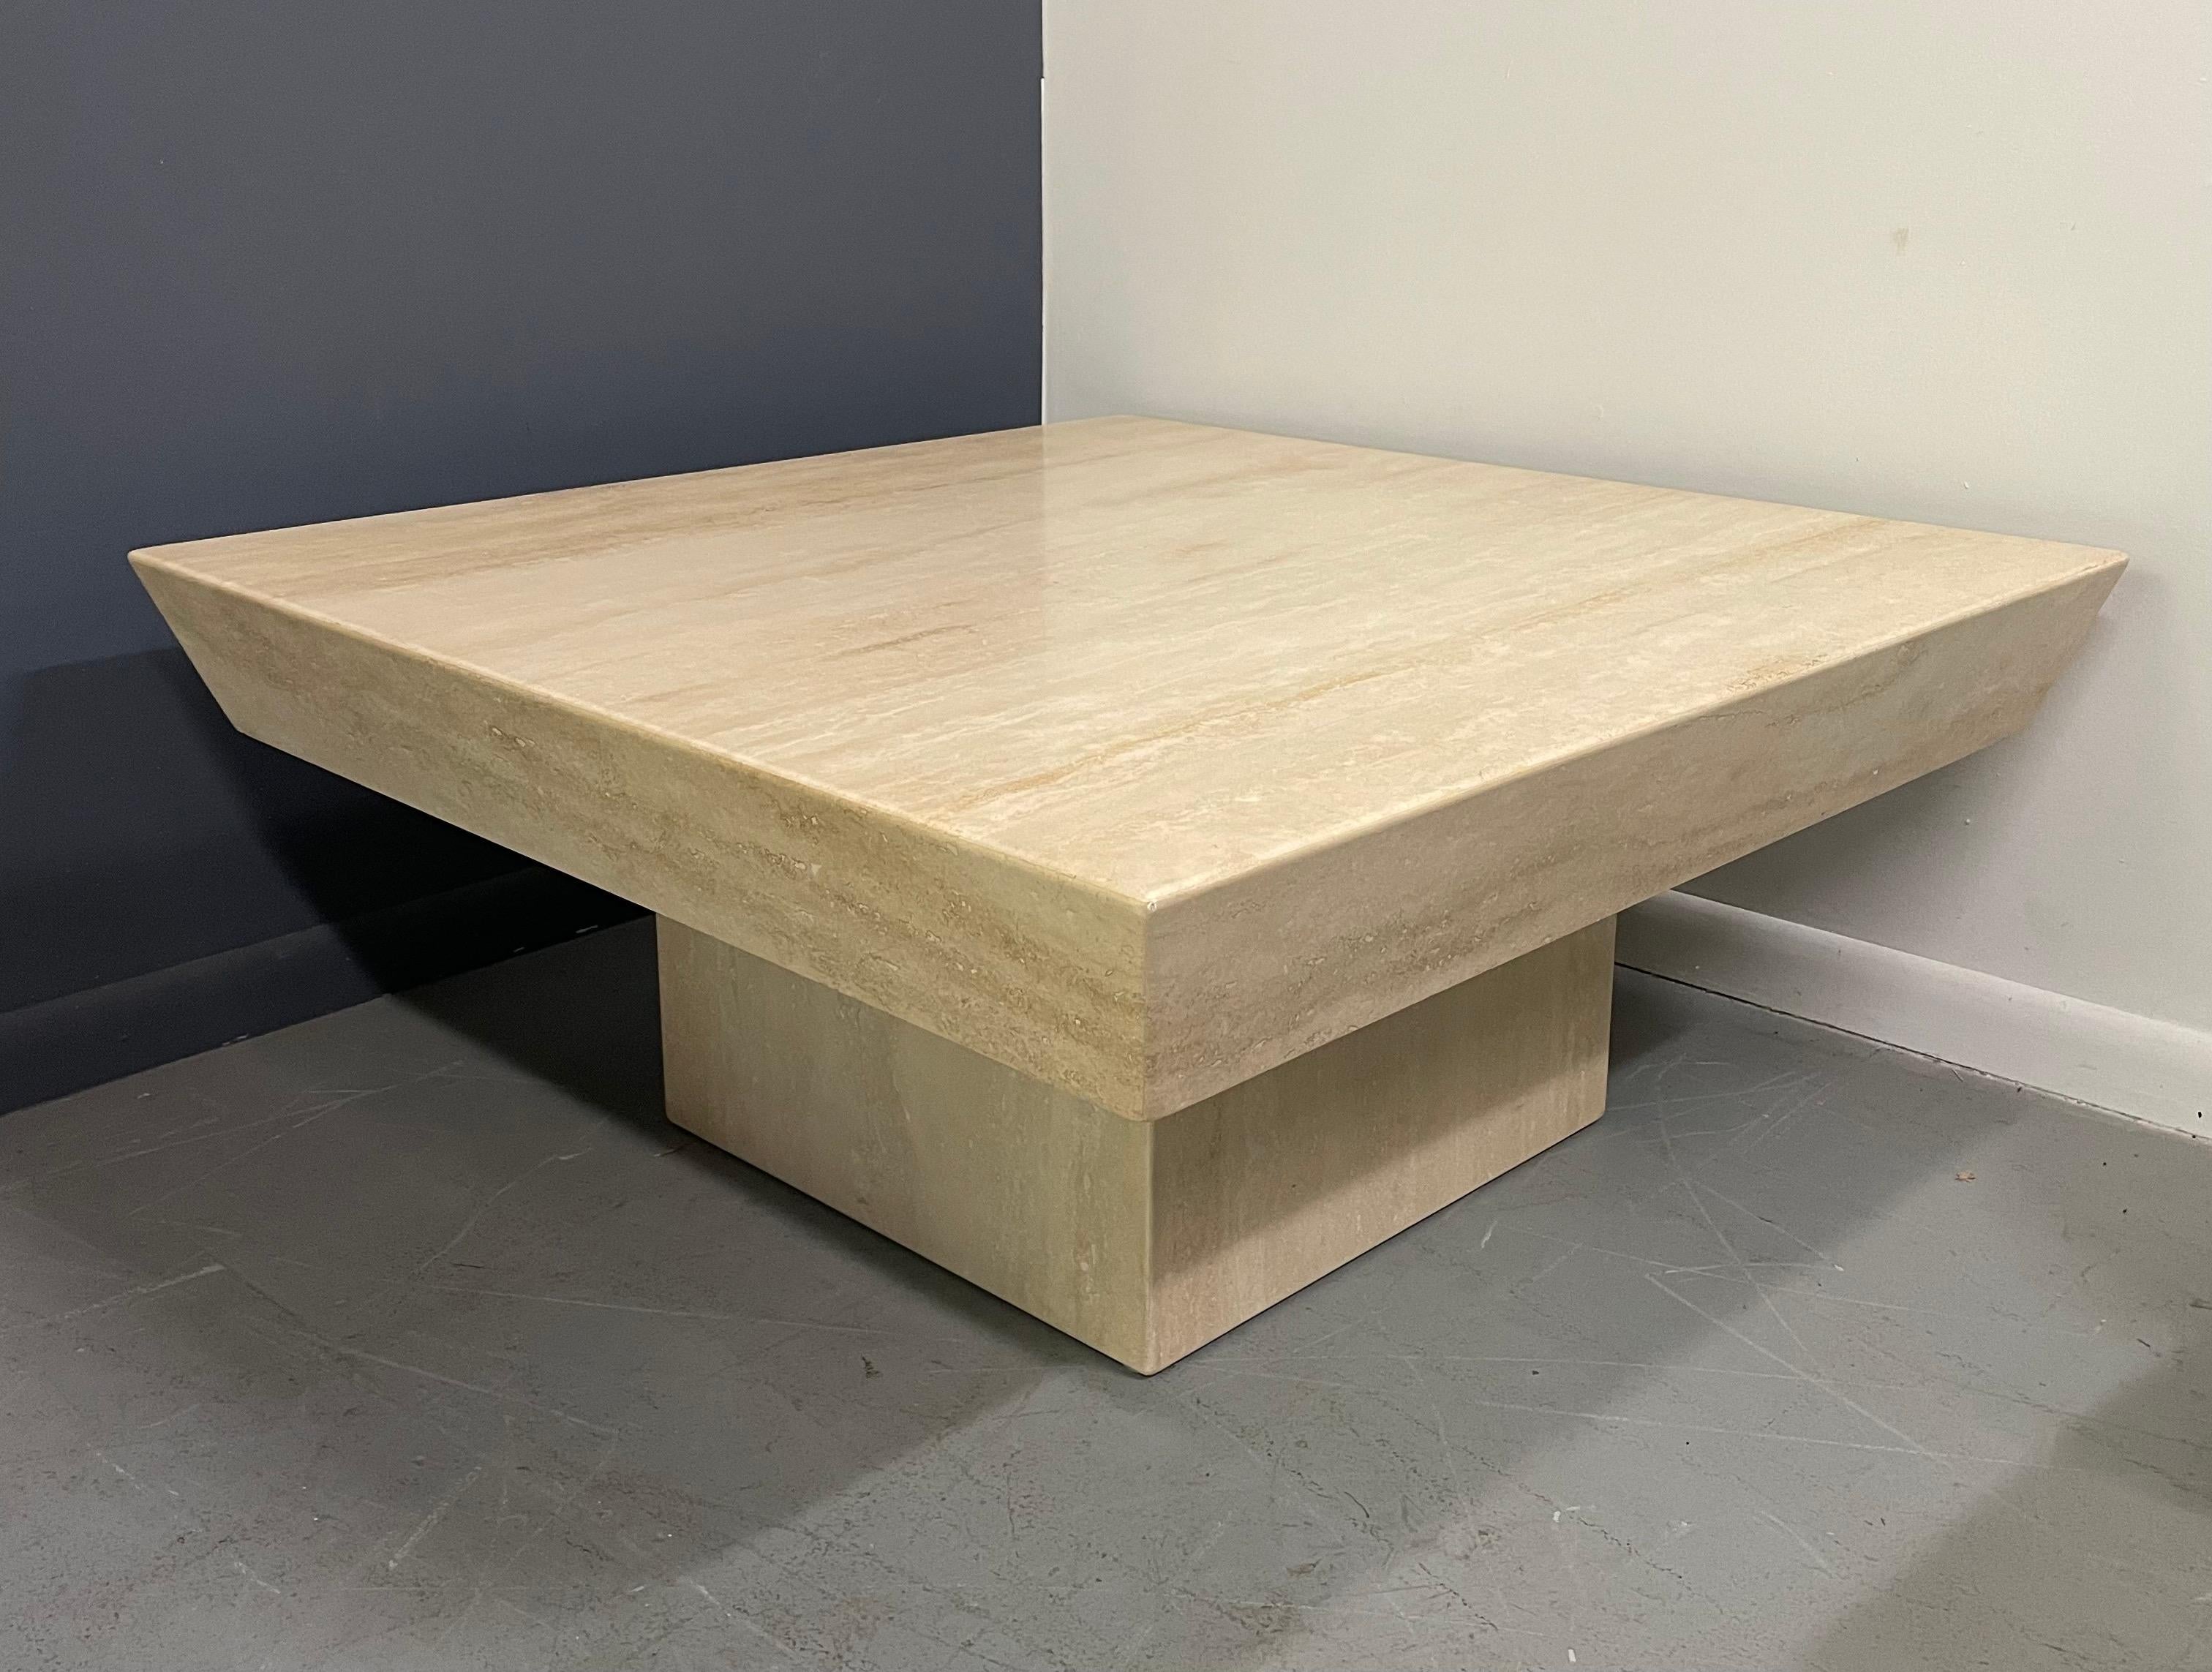 Impressive travertine table top with deep angled sides that provide a profile that makes for a one of a kind look.